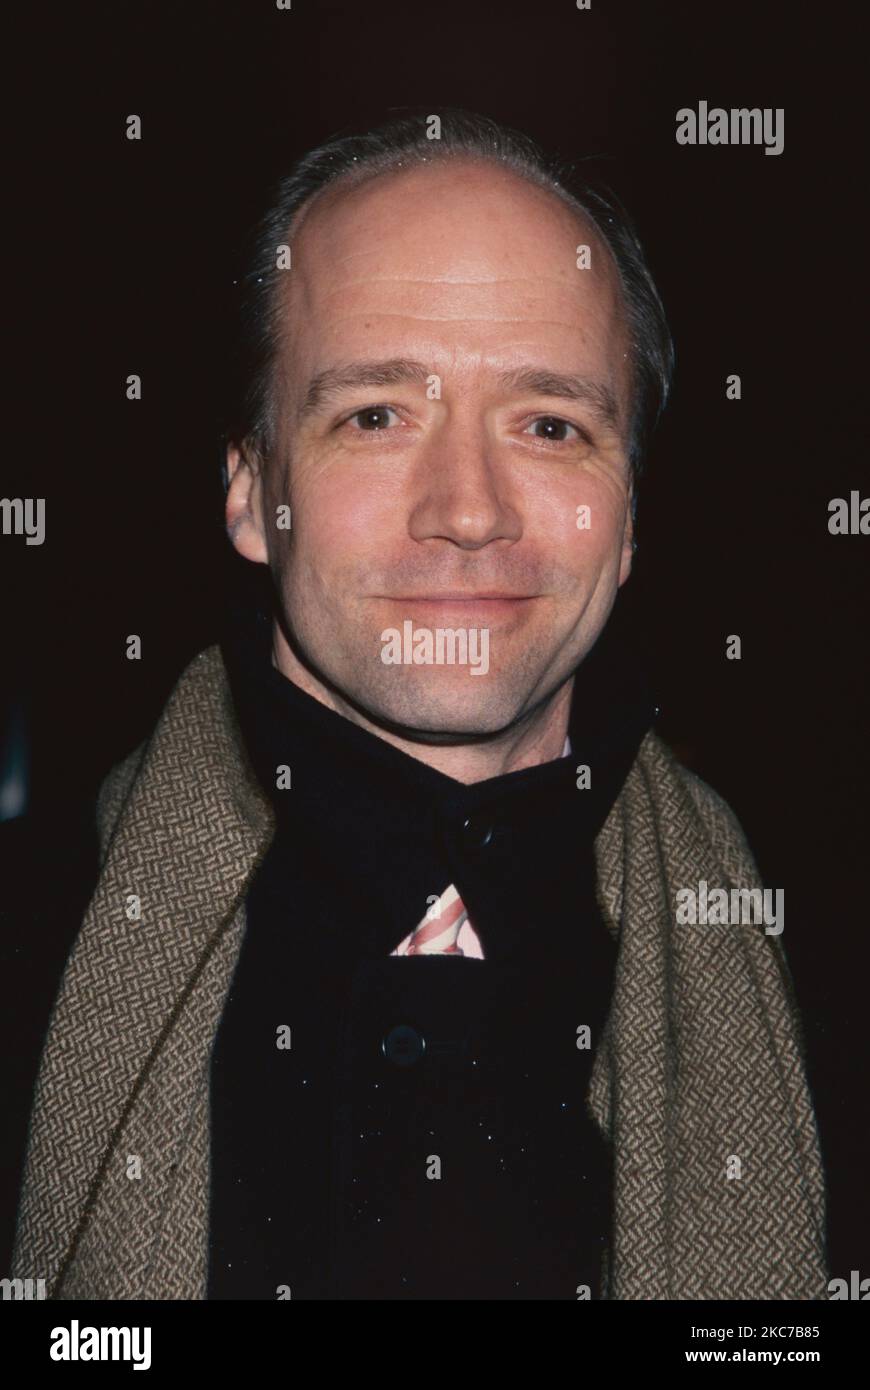 https://c8.alamy.com/comp/2KC7B85/file-photo-douglas-mcgrath-has-passed-away-douglas-mcgrath-attends-a-screening-of-company-man-at-mgm-screening-room-in-new-york-city-on-march-5-2001-photo-credit-henry-mcgeemediapunch-2KC7B85.jpg